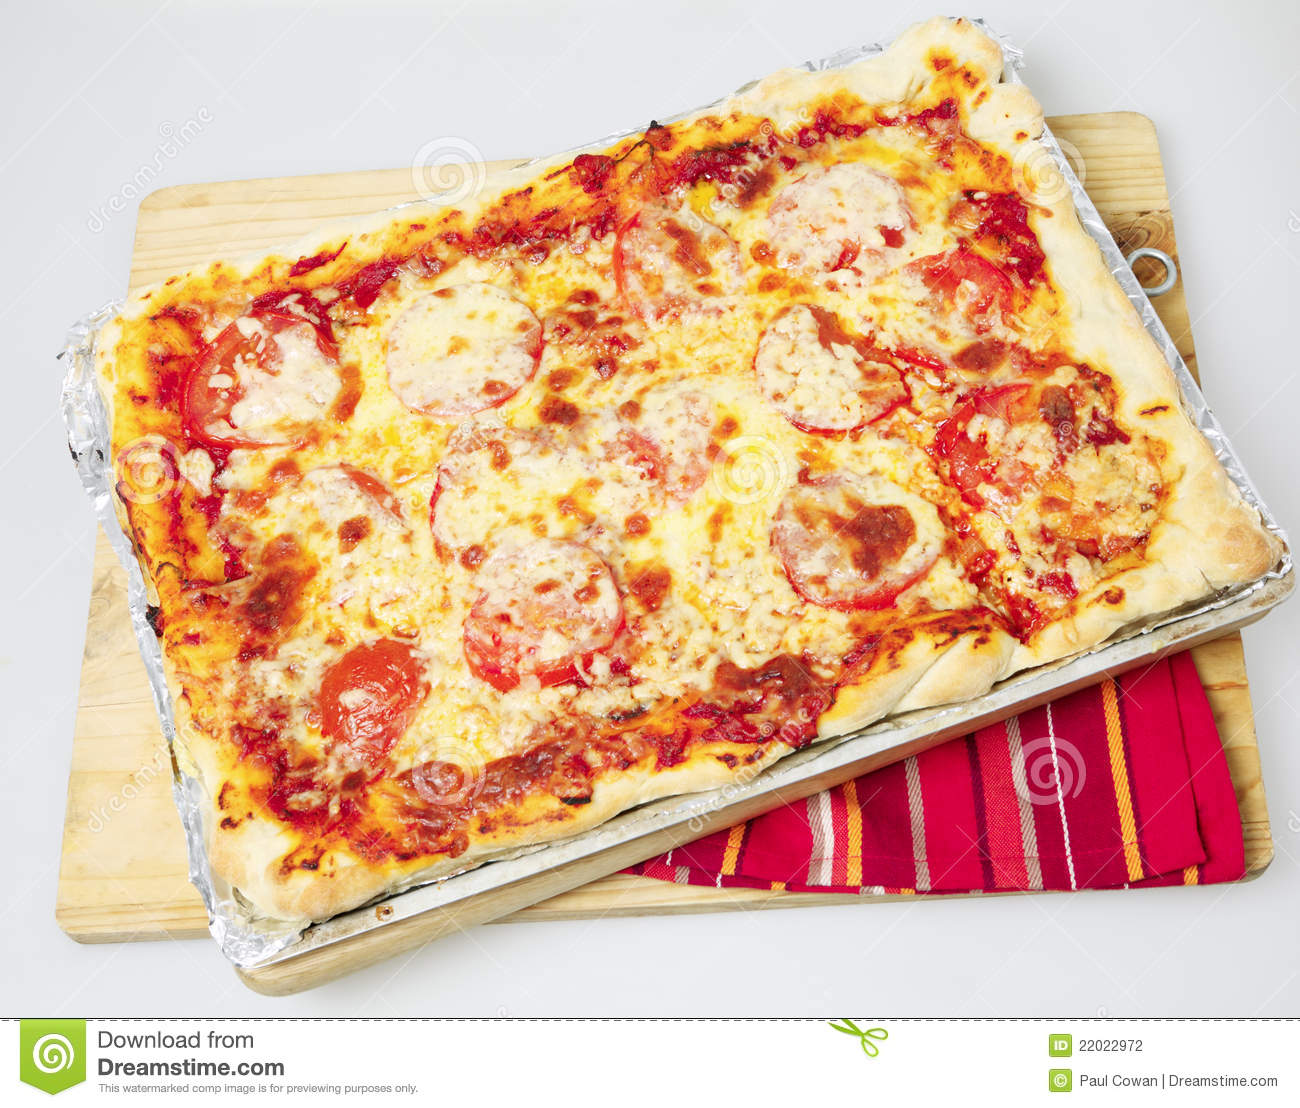     Rectangular Pizza With Cheese And Tomato Topping On A Baking Sheet